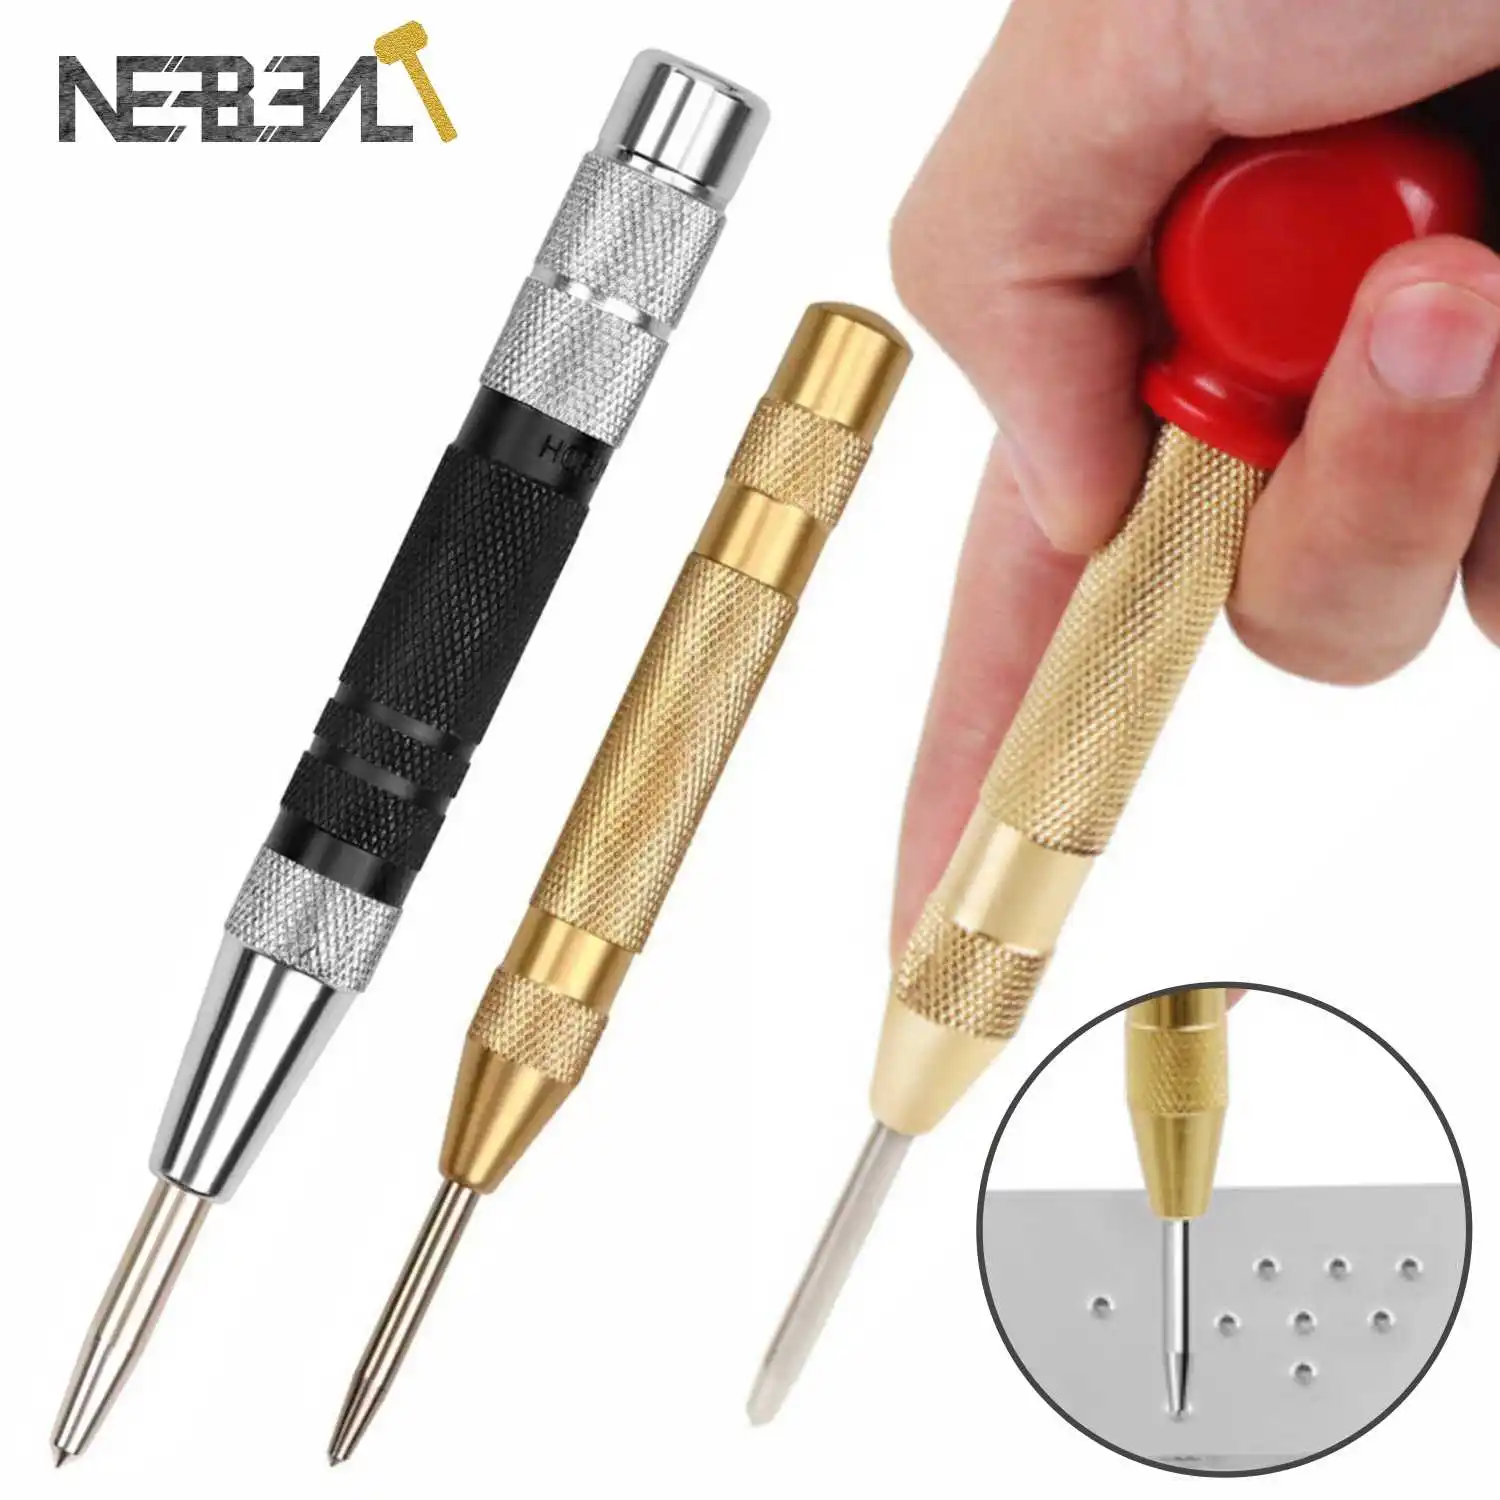 Automatic Center Pin Punch Spring Loaded Marking Starting Holes Machinists and Carpenters Wood Press Dent Marker Tool Drill Bit